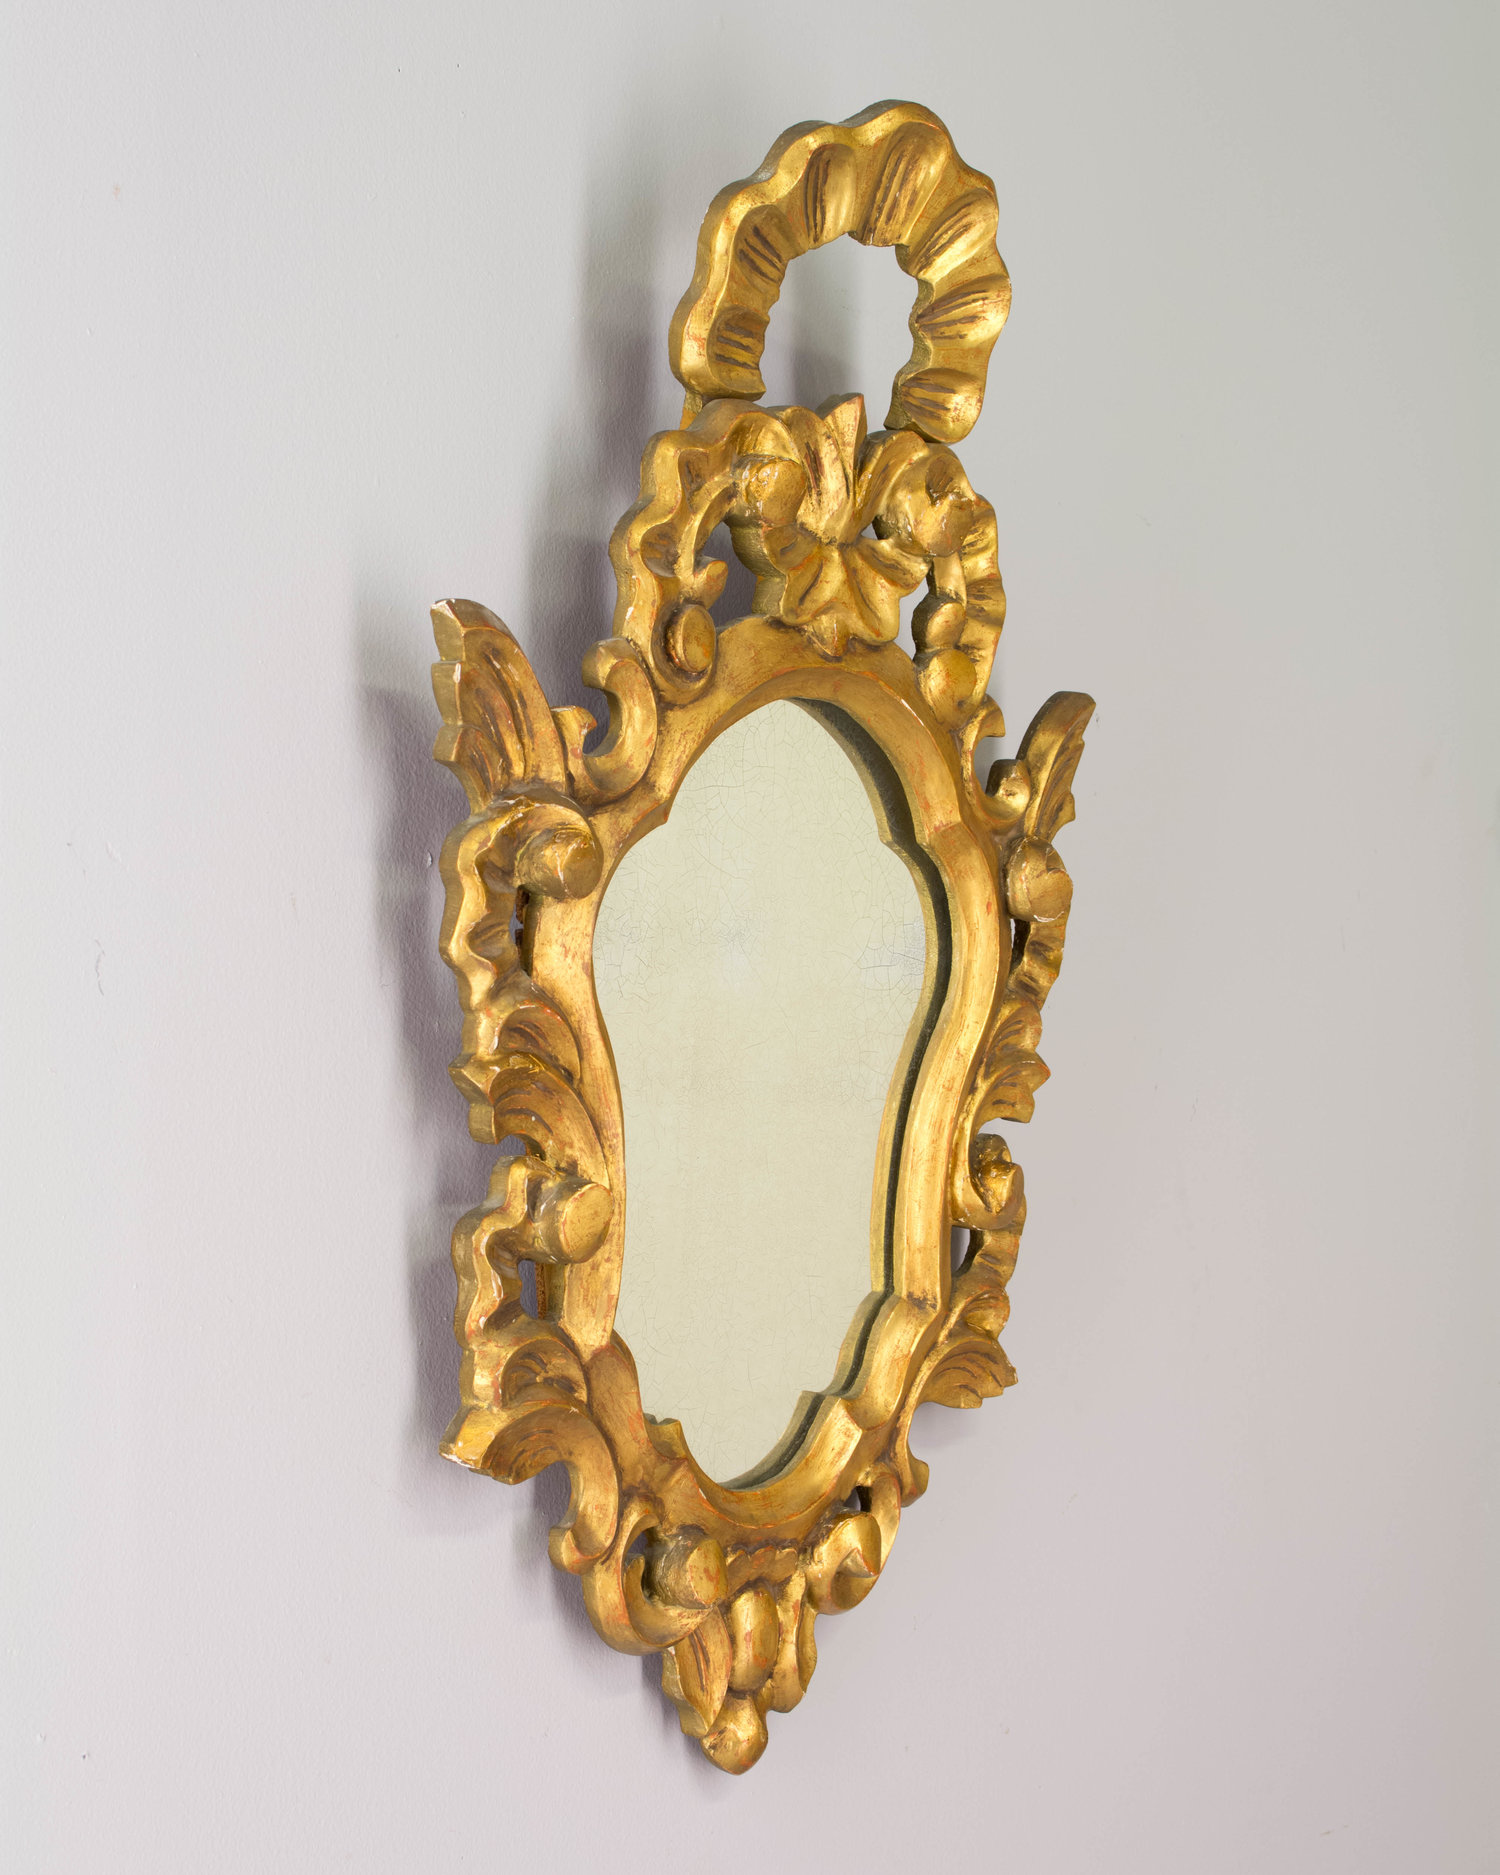 Olivier Fleury French Antiques-Antique Mirrors for Sale | French Antiques  Mirrors for Sale